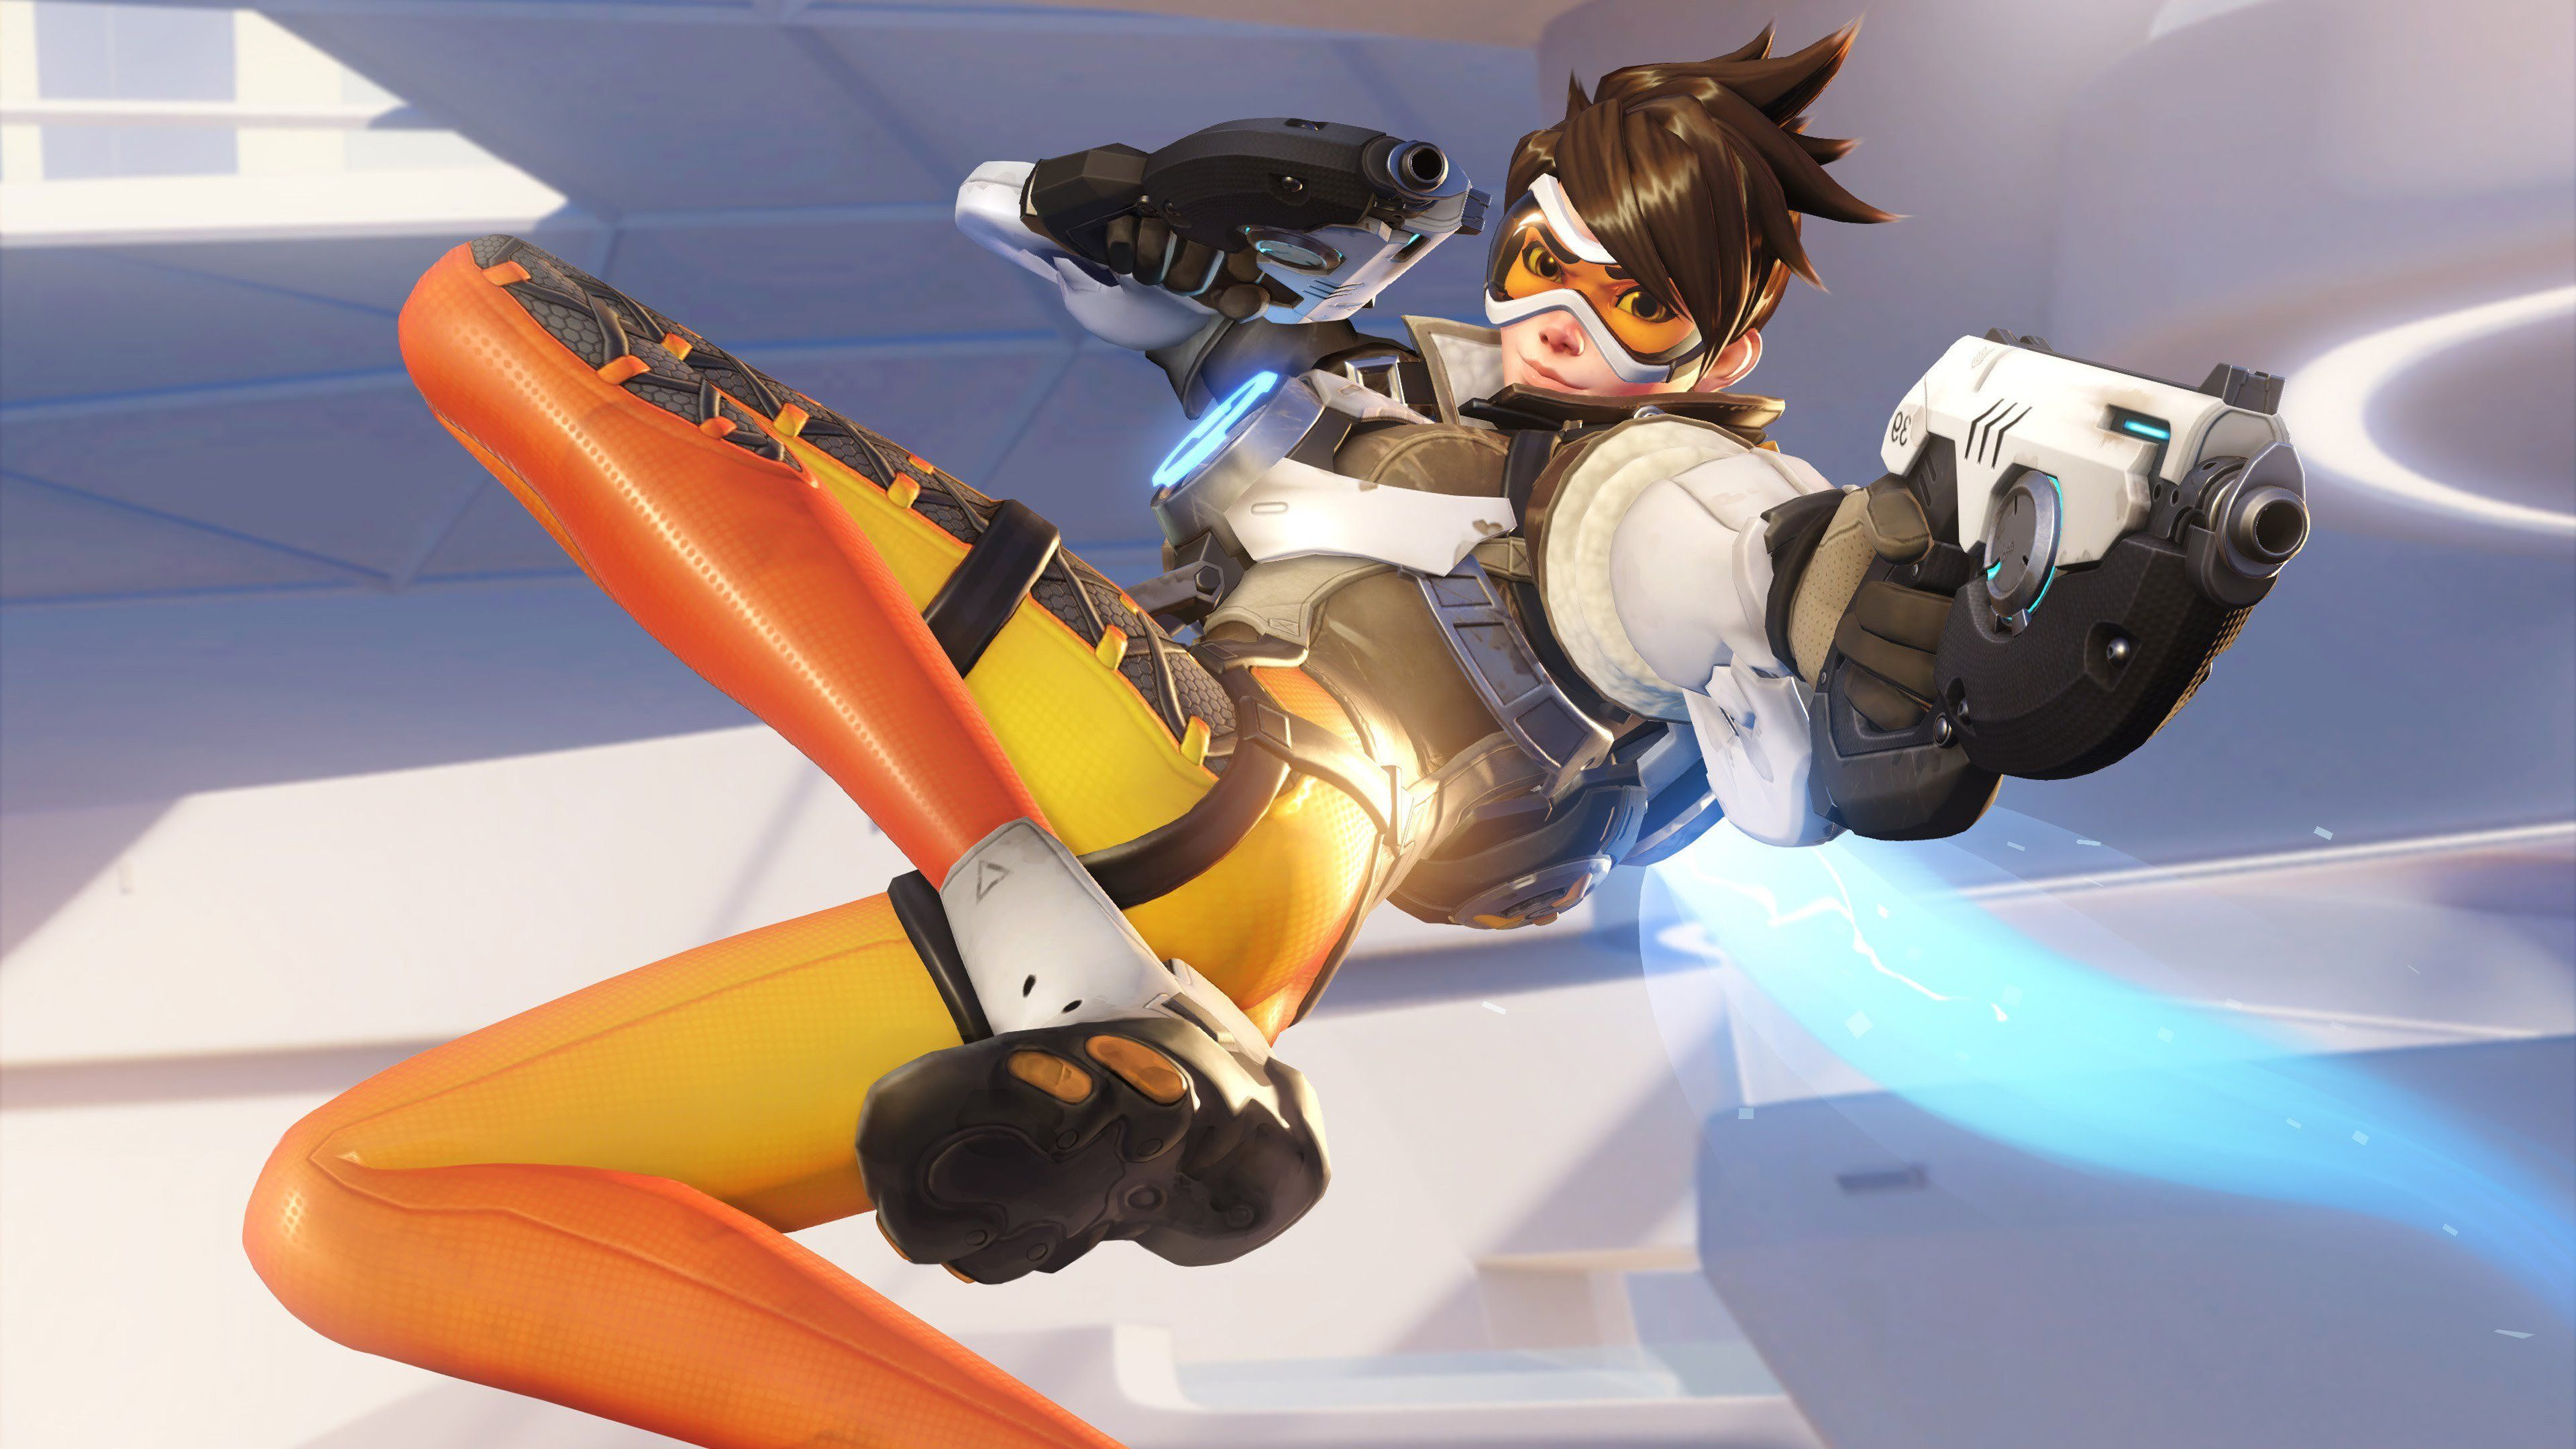 3840x2160 Overwatch Tracer xbox games wallpapers, ps games wallpapers, pc games wallpapers, overwatch wallpapers, games w&acirc;&#128;&brvbar; | Overwatch tracer, Overwatch wallpapers, Overwatch